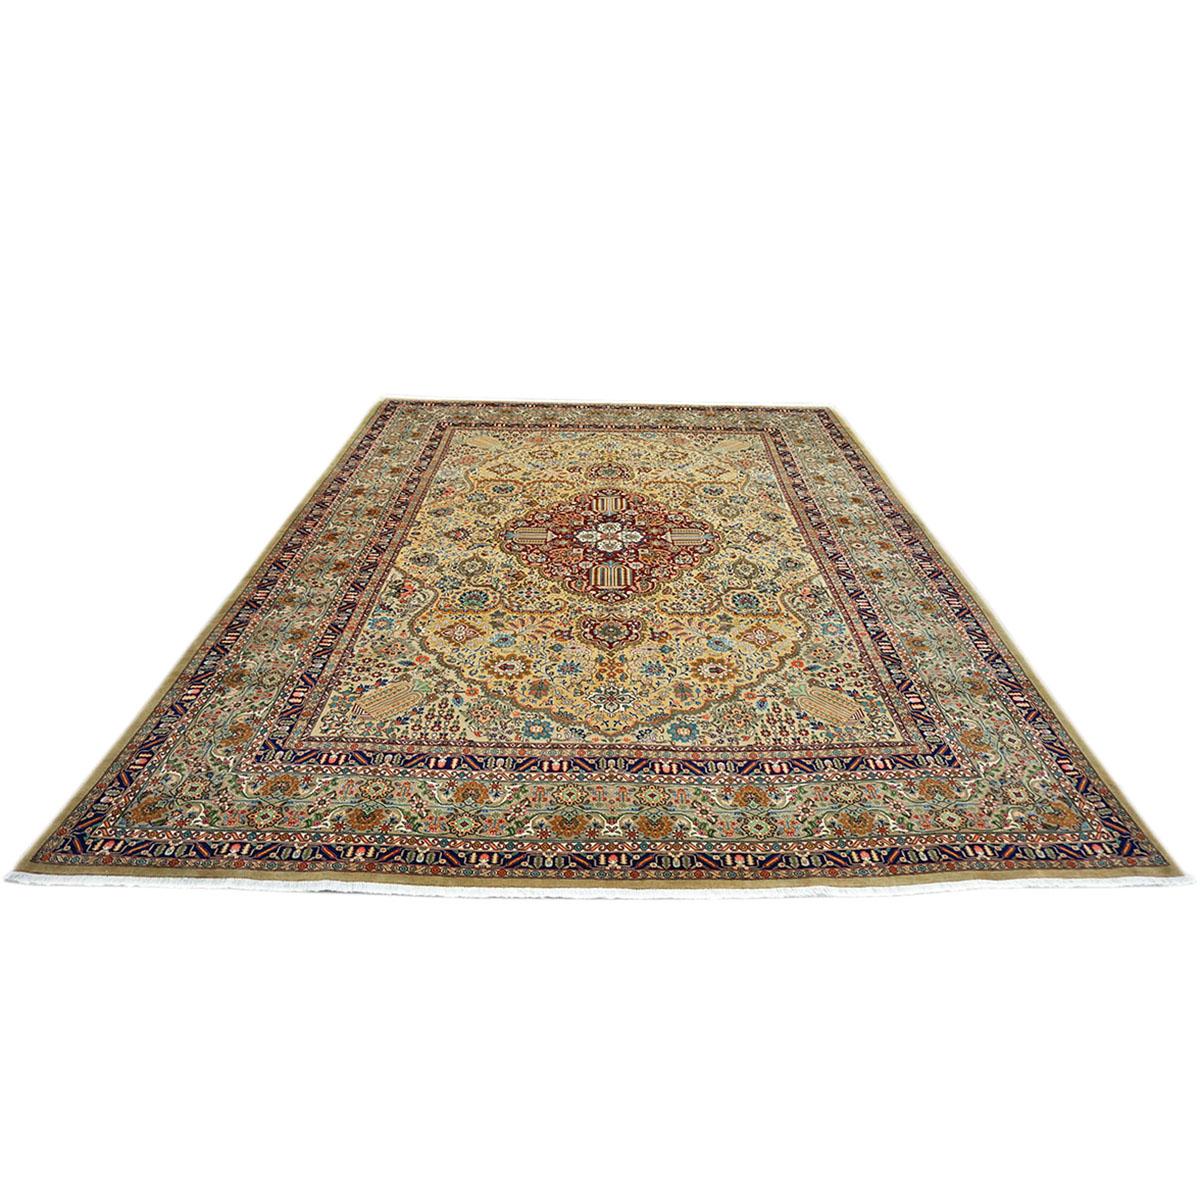 Mid-20th Century Antique Persian Tabriz 10x13 Tan, Taupe, Navy, & Gold Handmade Area Rug For Sale